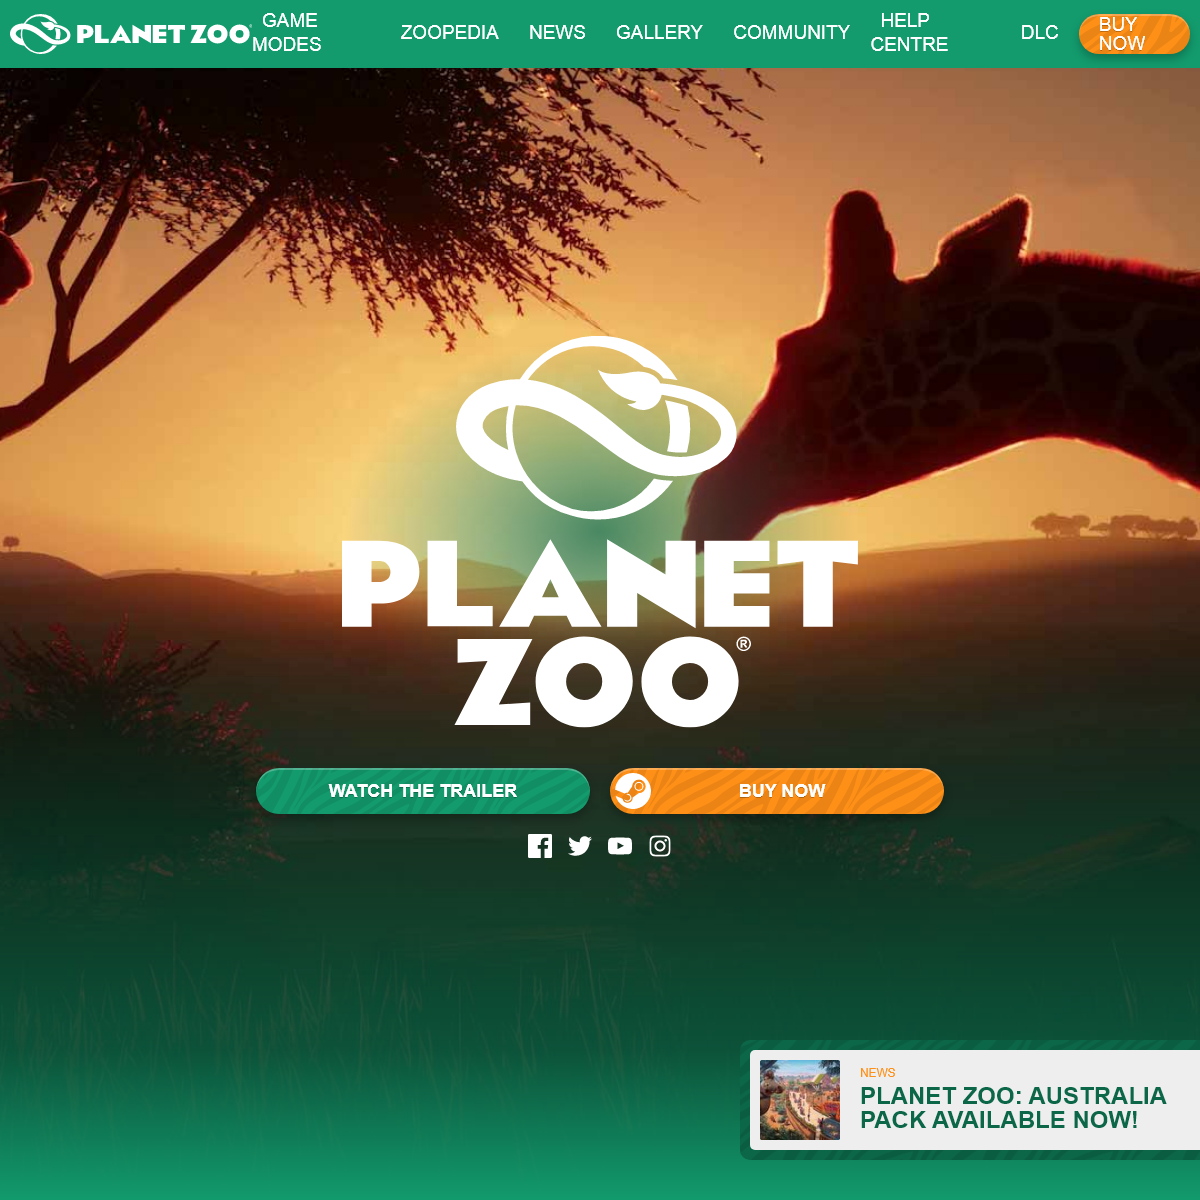 A complete backup of planetzoogame.com